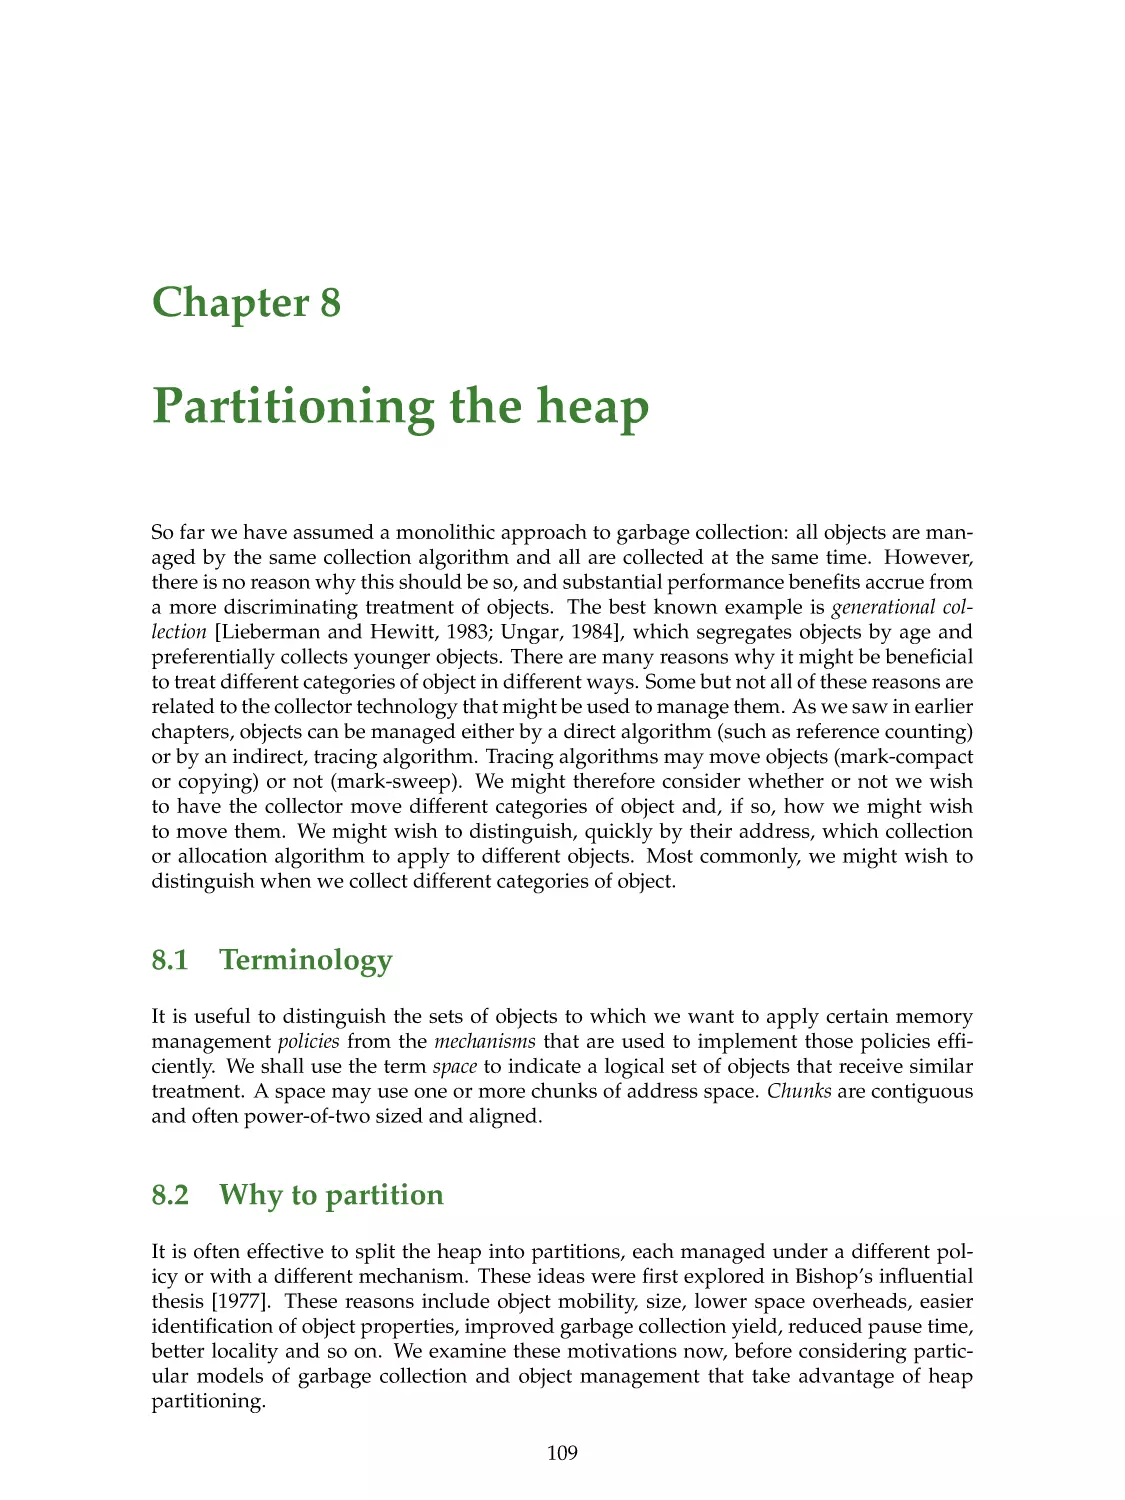 8. Partitioning the heap
8.1. Terminology
8.2. Why to partition